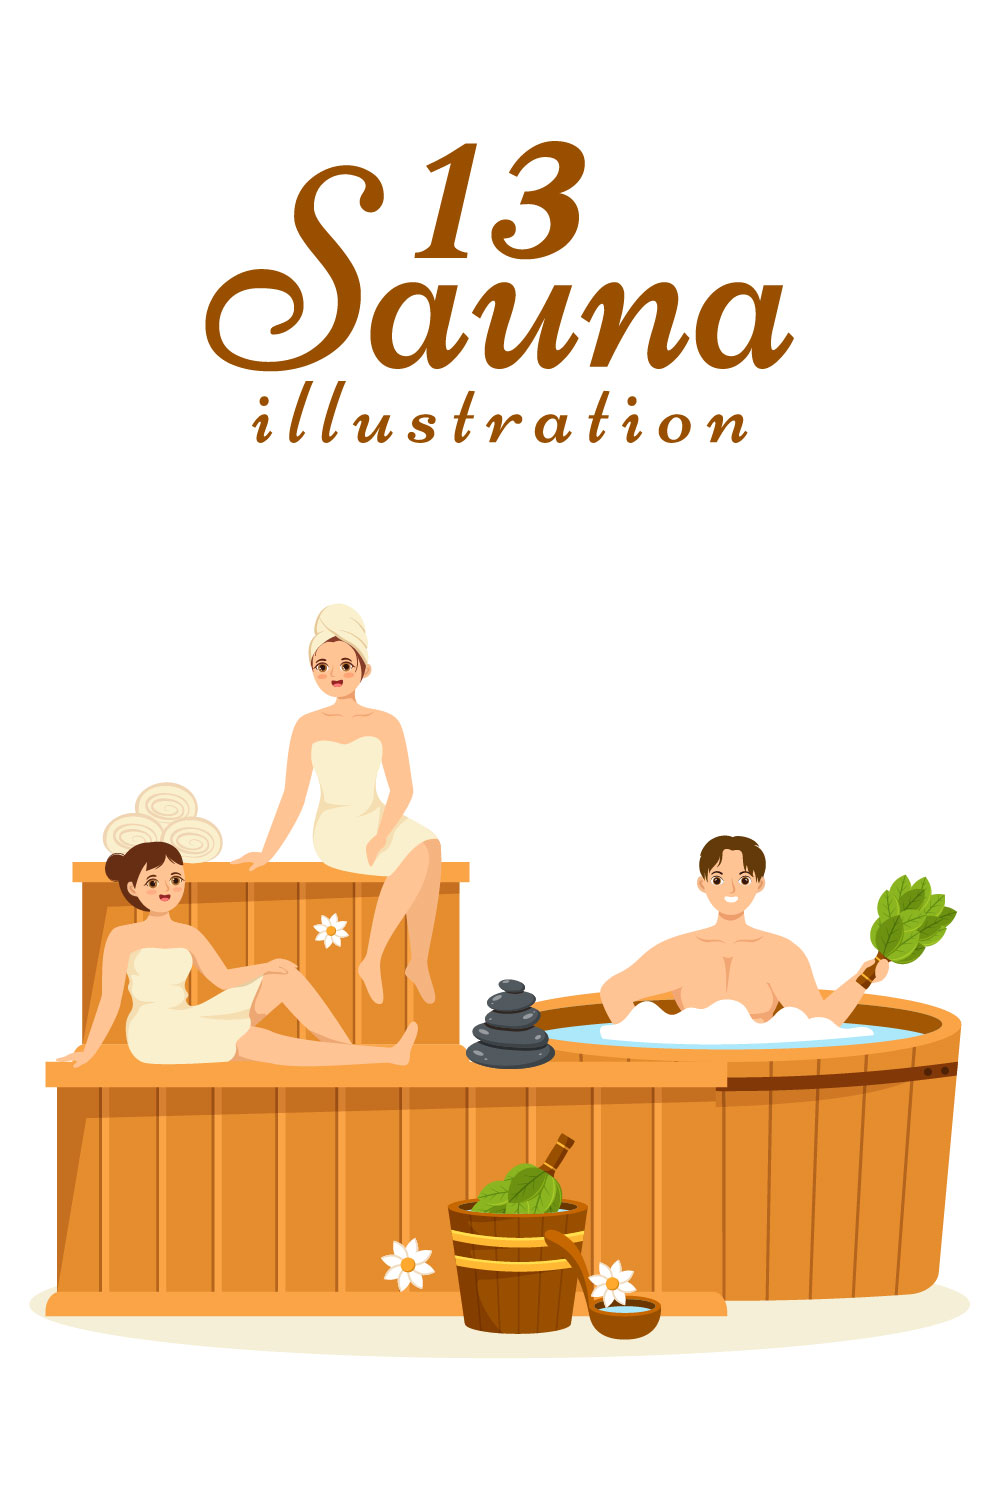 Irresistible image with people in the sauna.